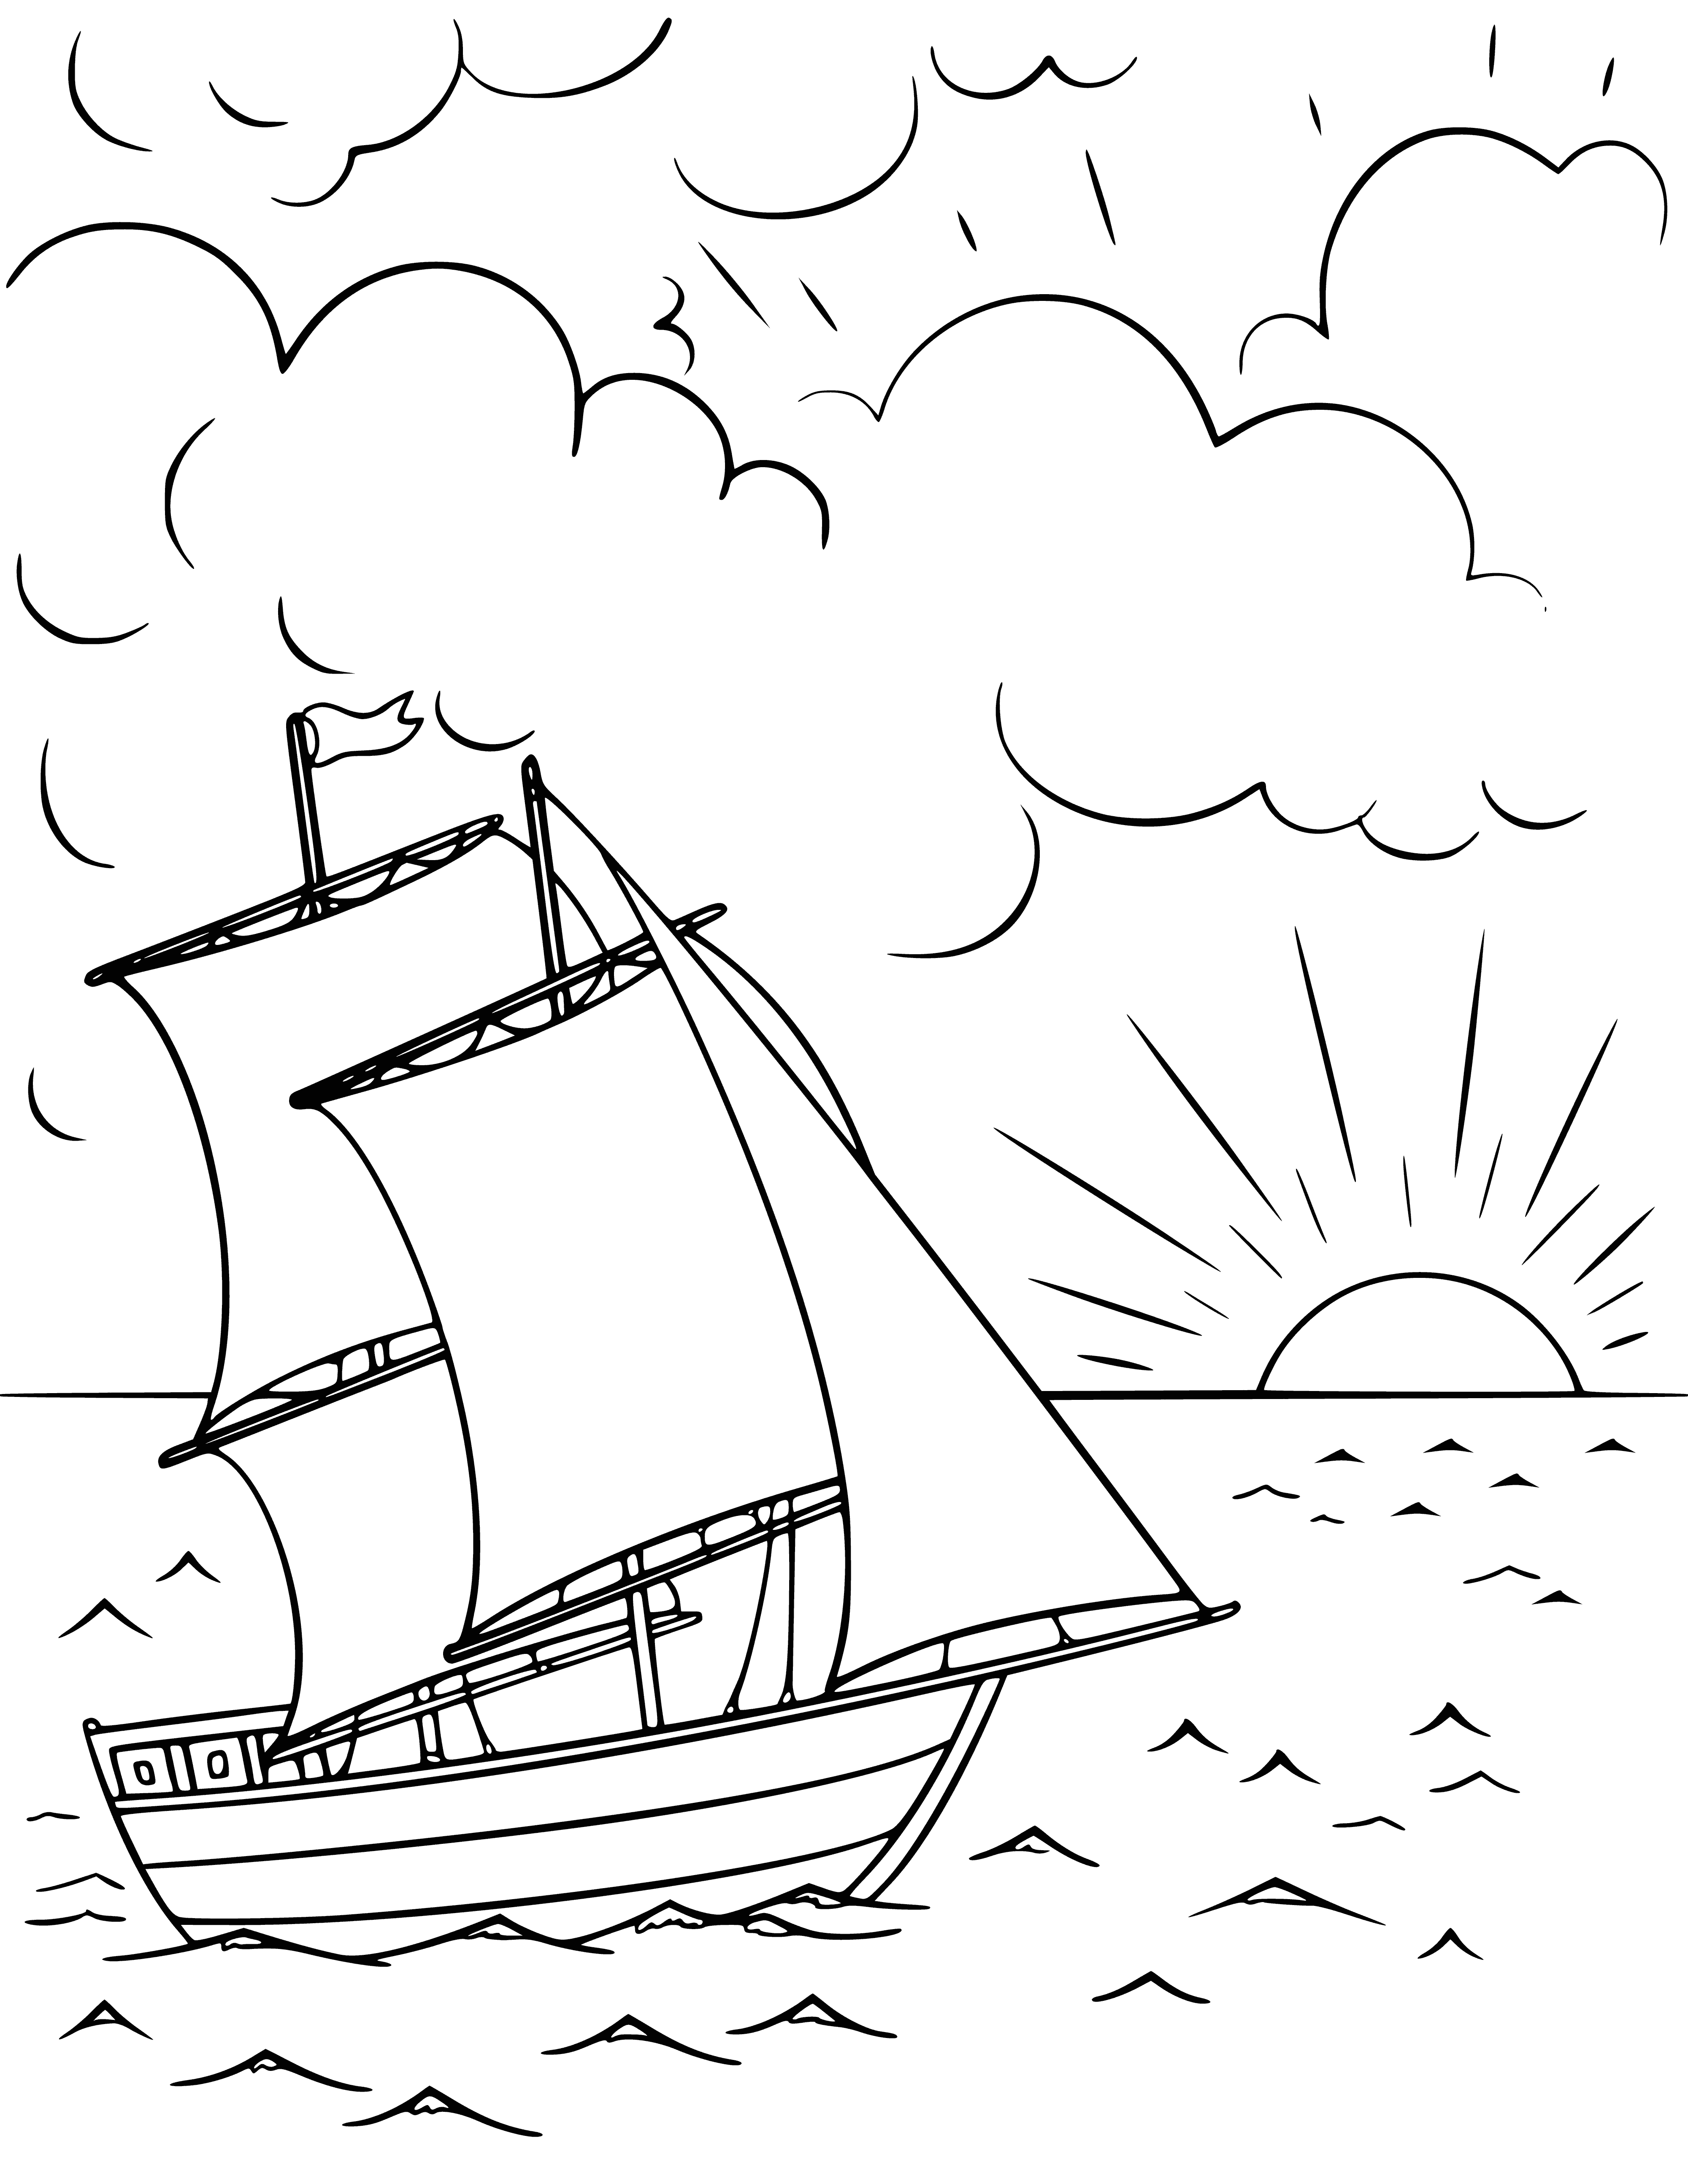 coloring page: A white sailboat, a person in a life jacket, set against an orange/red sky and a dark blue sea as the sun sets.